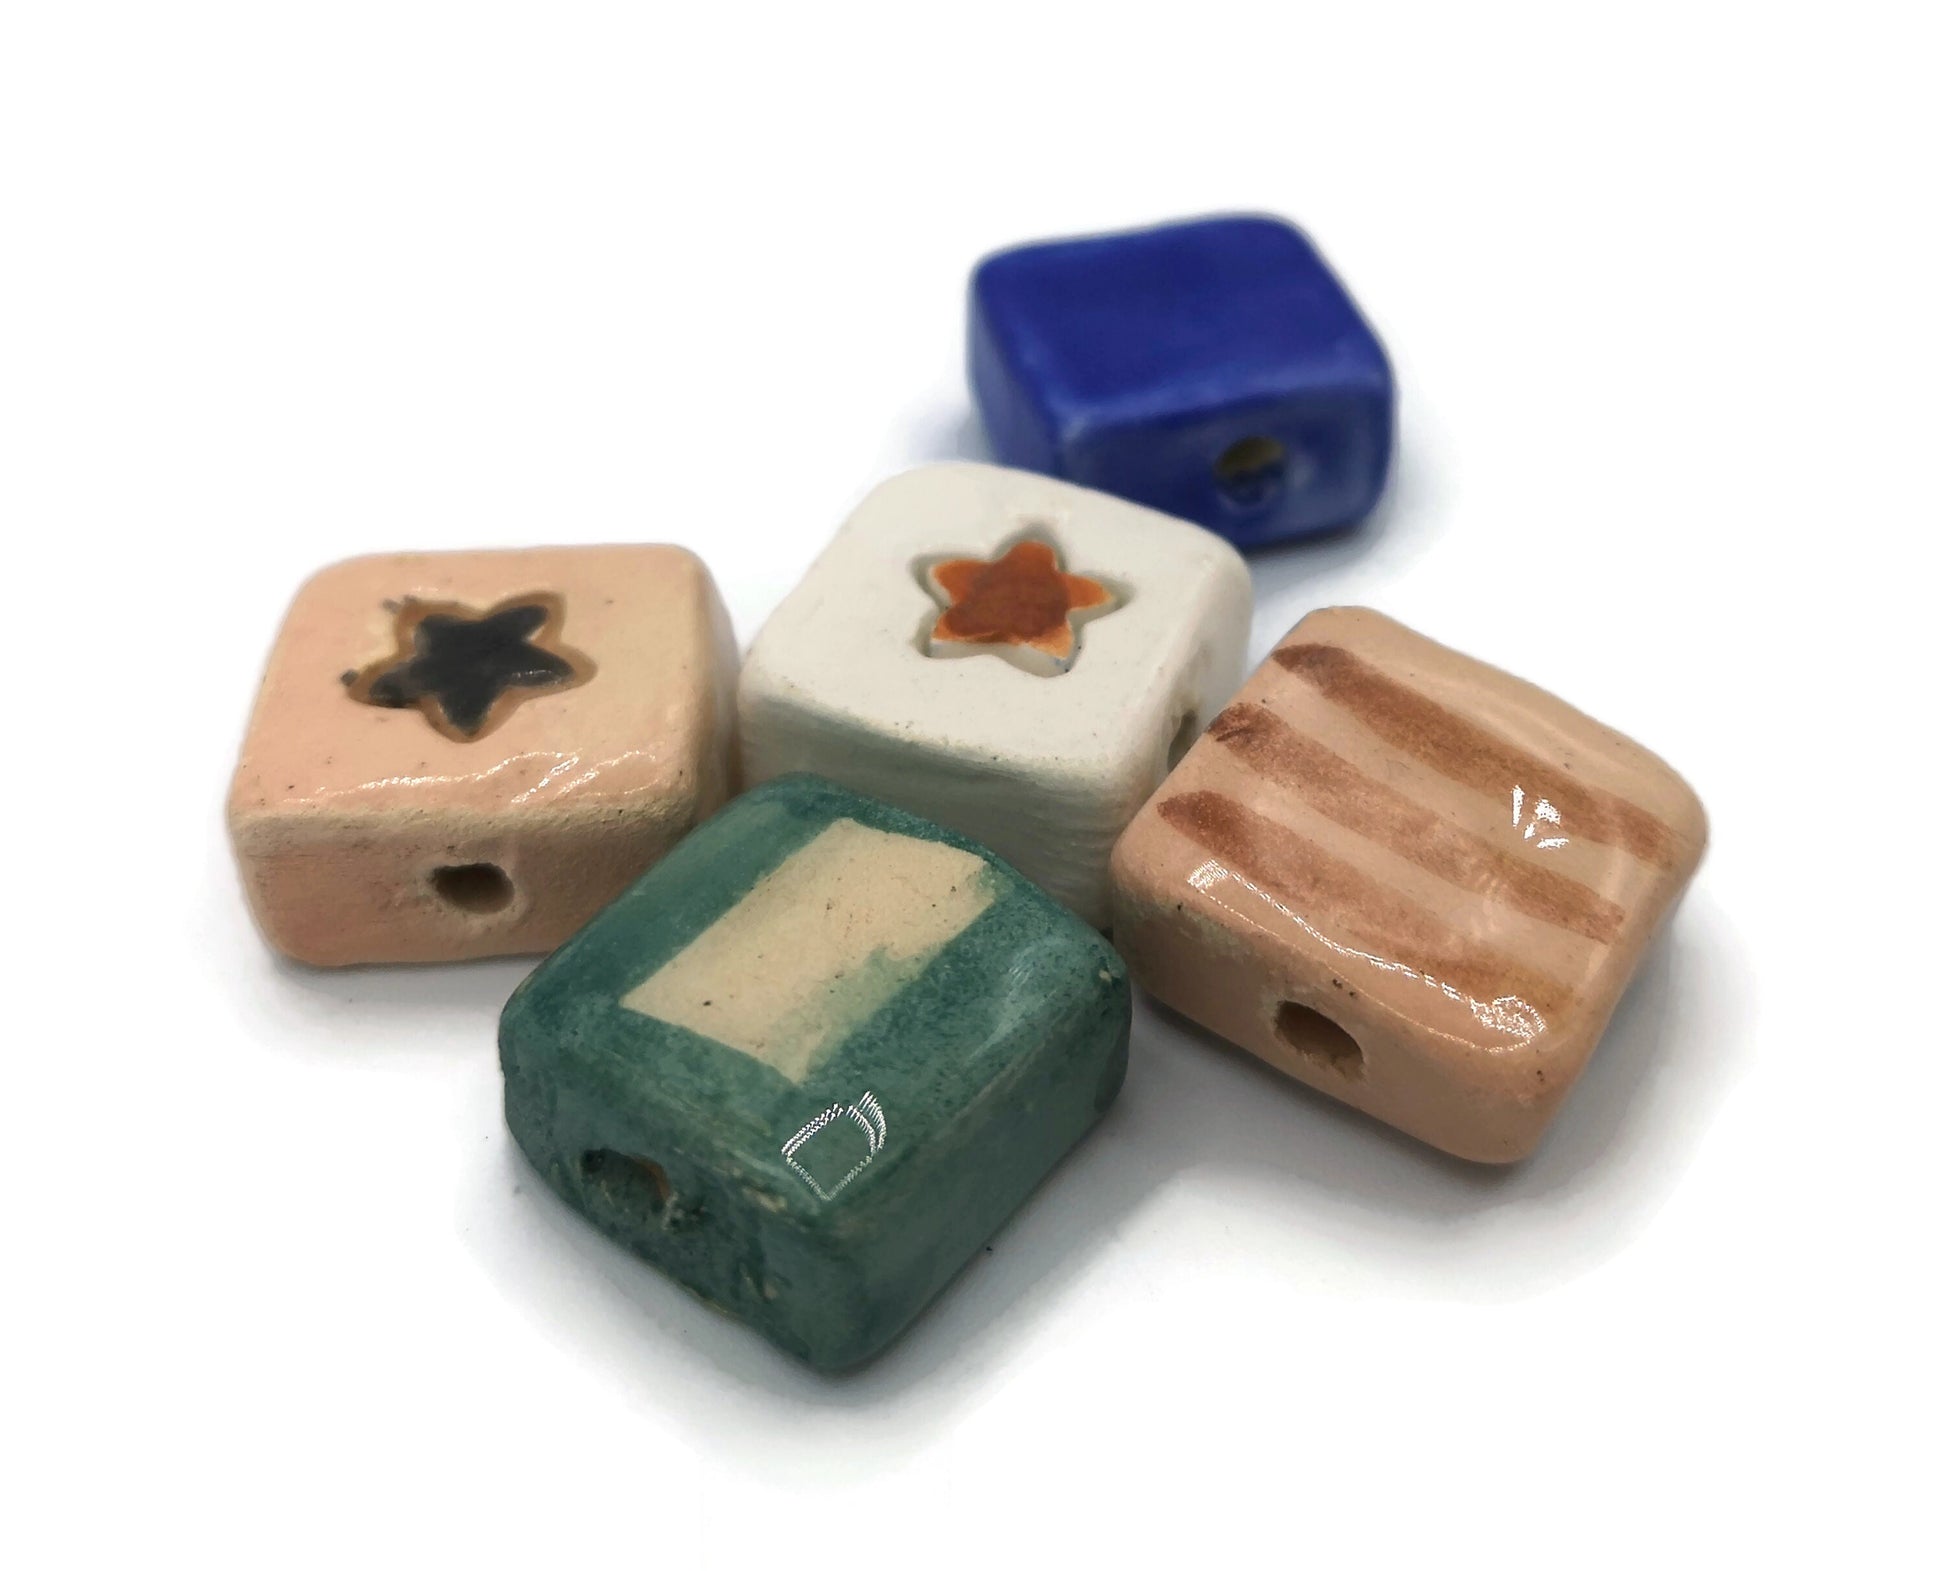 unique beads for jewelry making, square beads, set of 5 assorted beads, large ceramic beads for jewelry making supplies, craft beads, best - Ceramica Ana Rafael